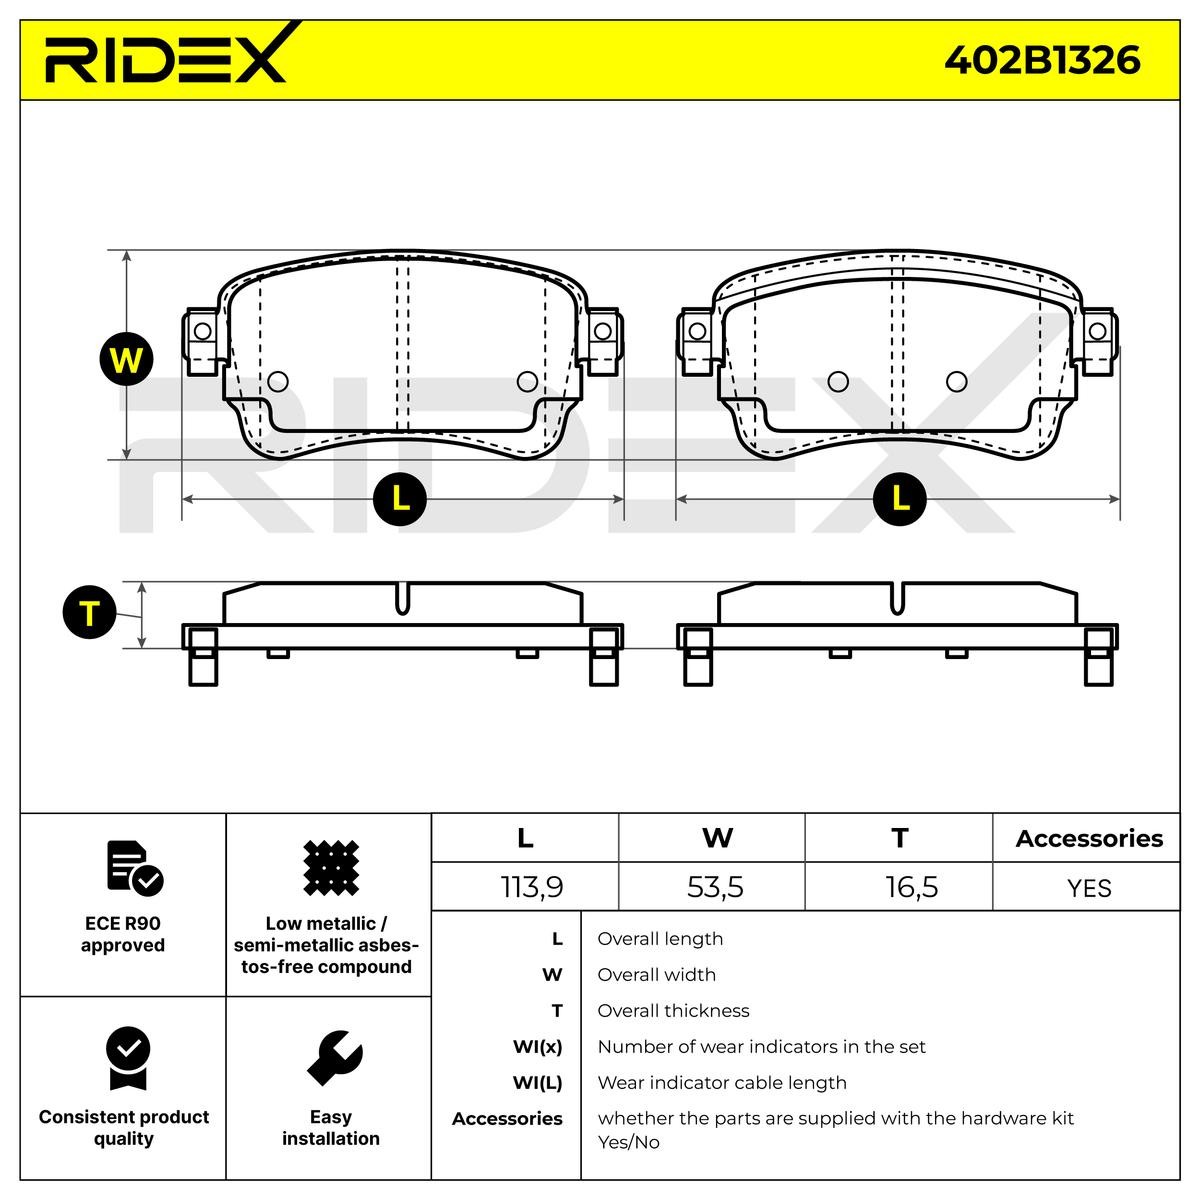 402B1326 Set of brake pads 402B1326 RIDEX Rear Axle, not prepared for wear indicator, with acoustic wear warning, with brake caliper screws, with accessories